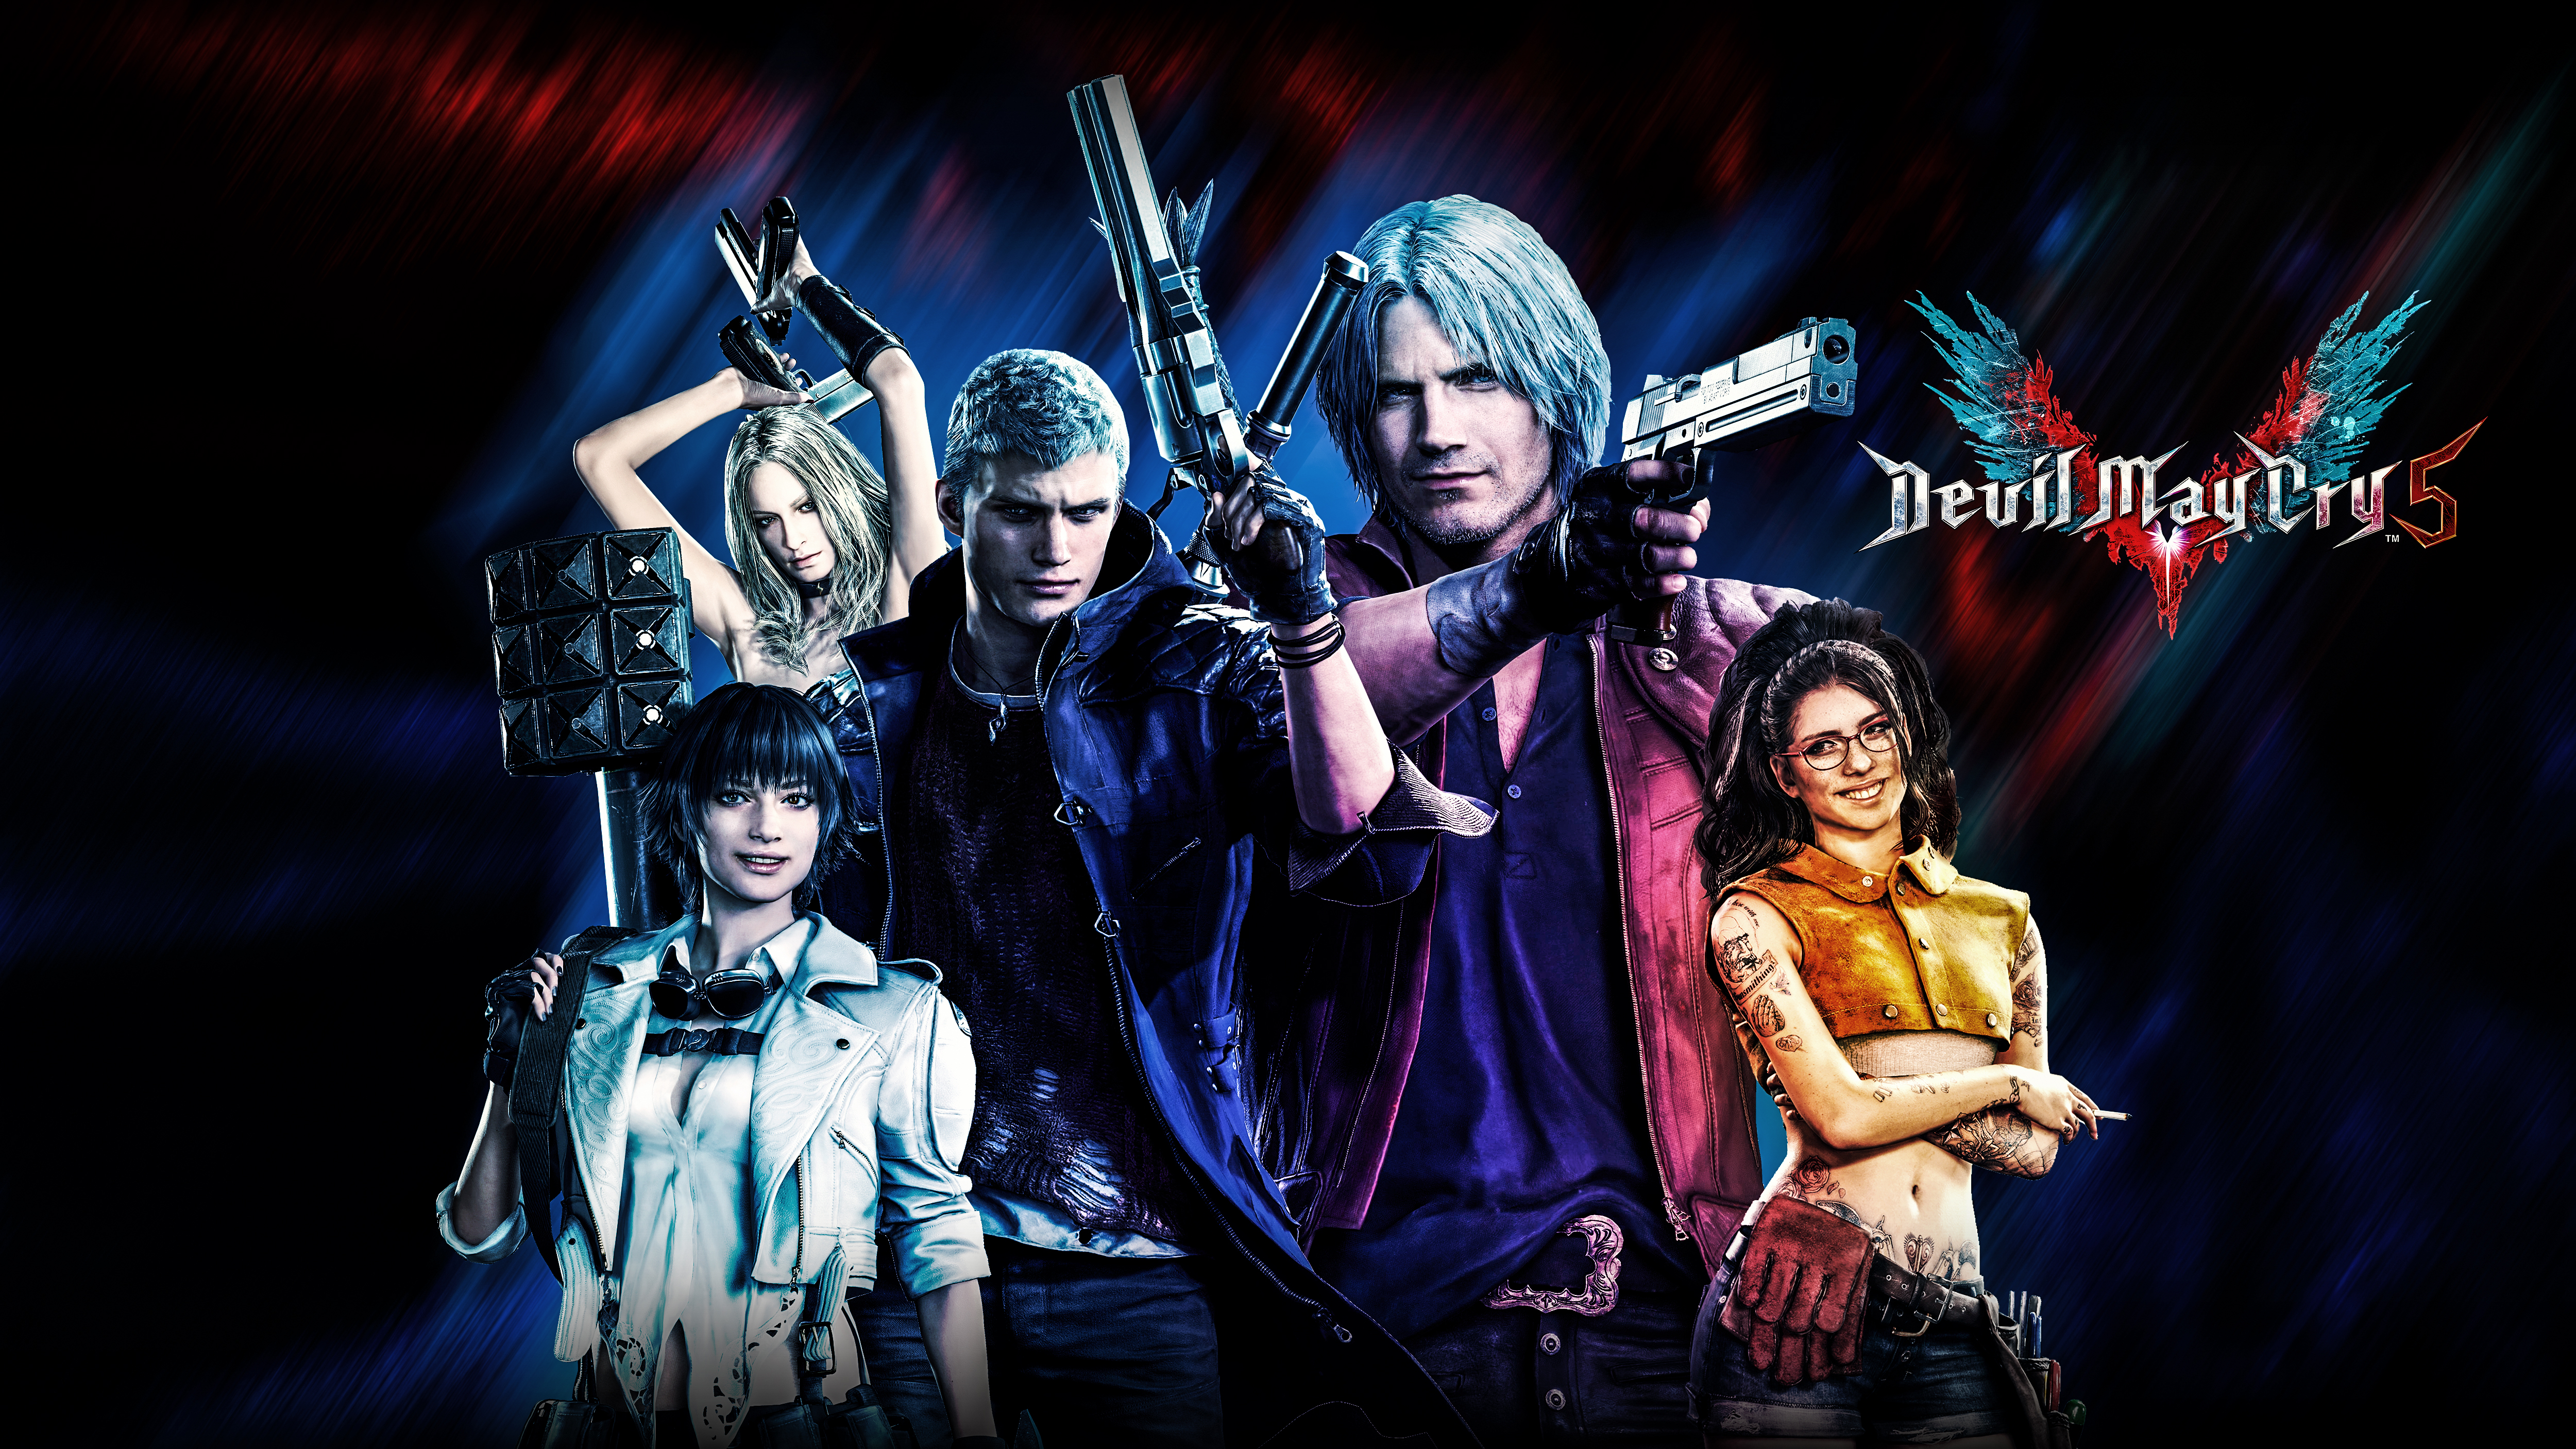 Video Game Devil May Cry 5 4k Ultra HD Wallpaper by pargraph